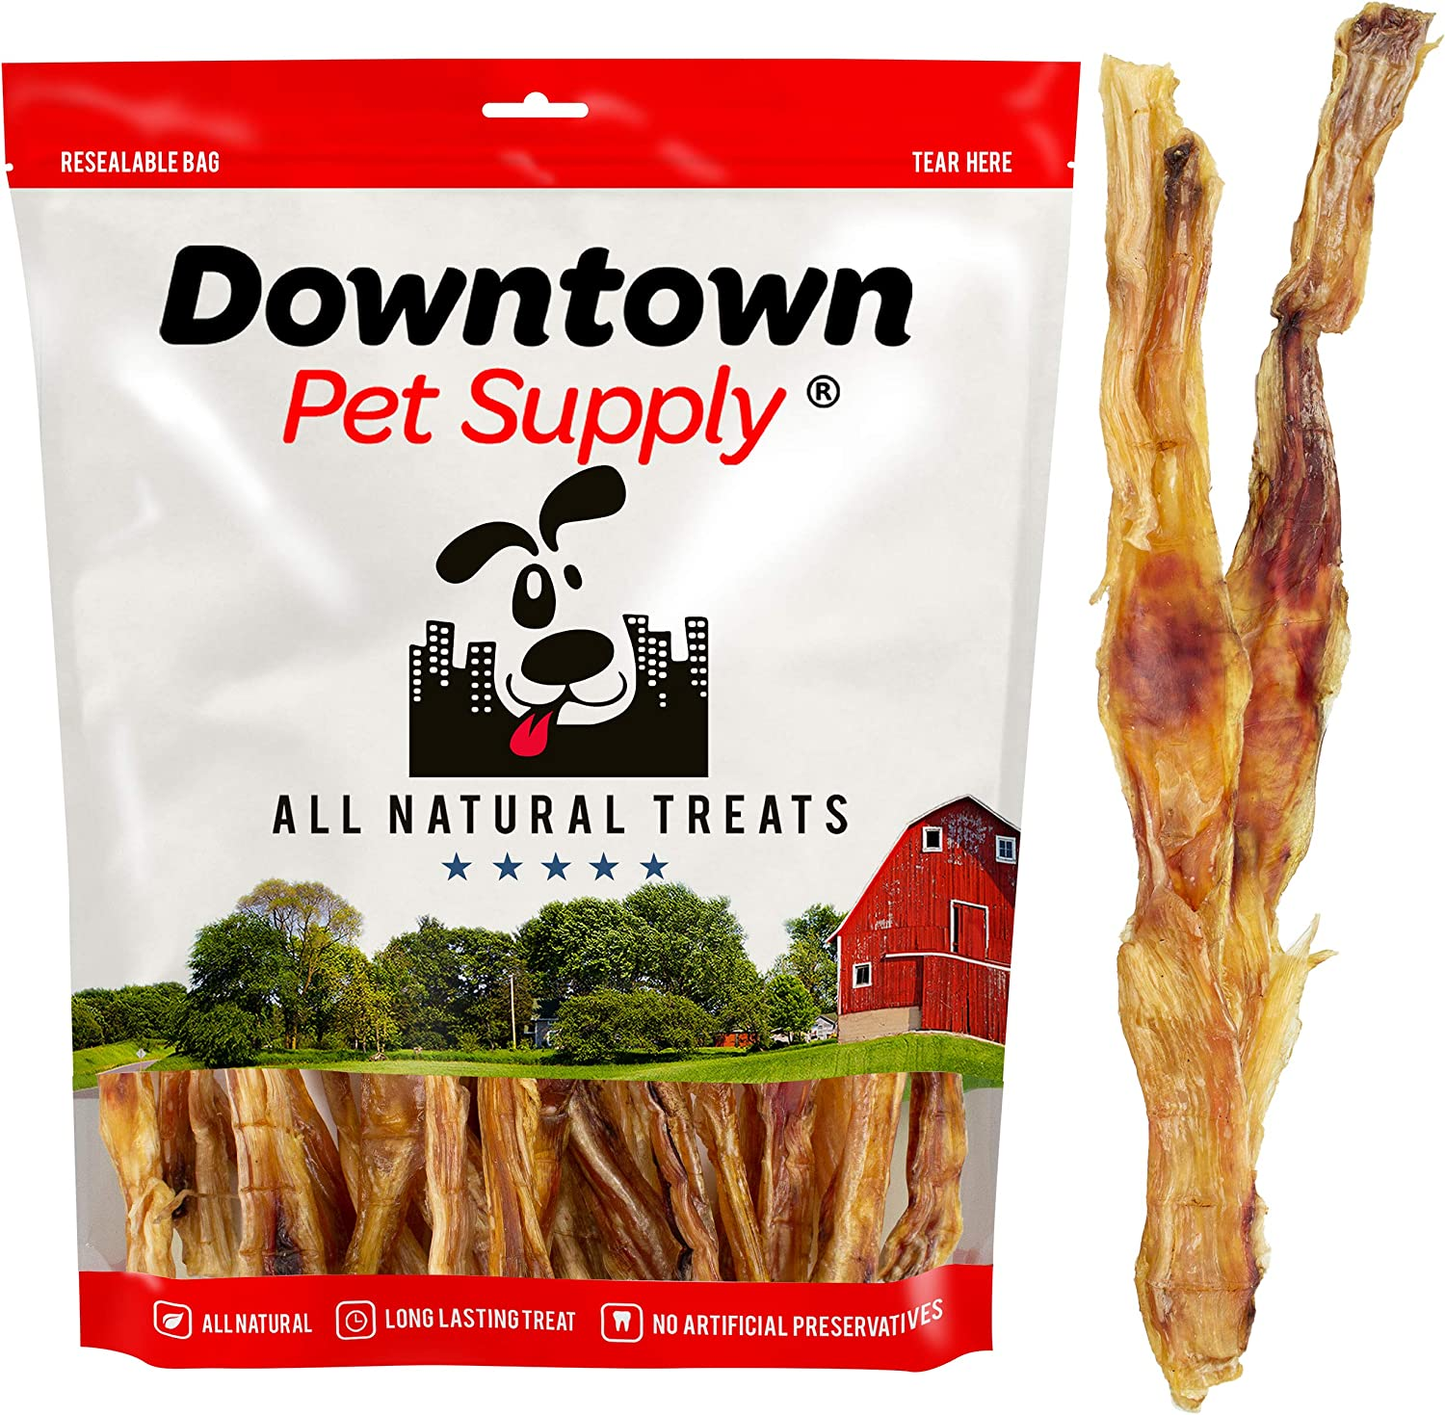 USA Turkey Tendons for Dogs, 12 inch American Sourced Single Ingredient Puppy Sticks, Tendon Chews Dog Treat by Downtown Pet Supply